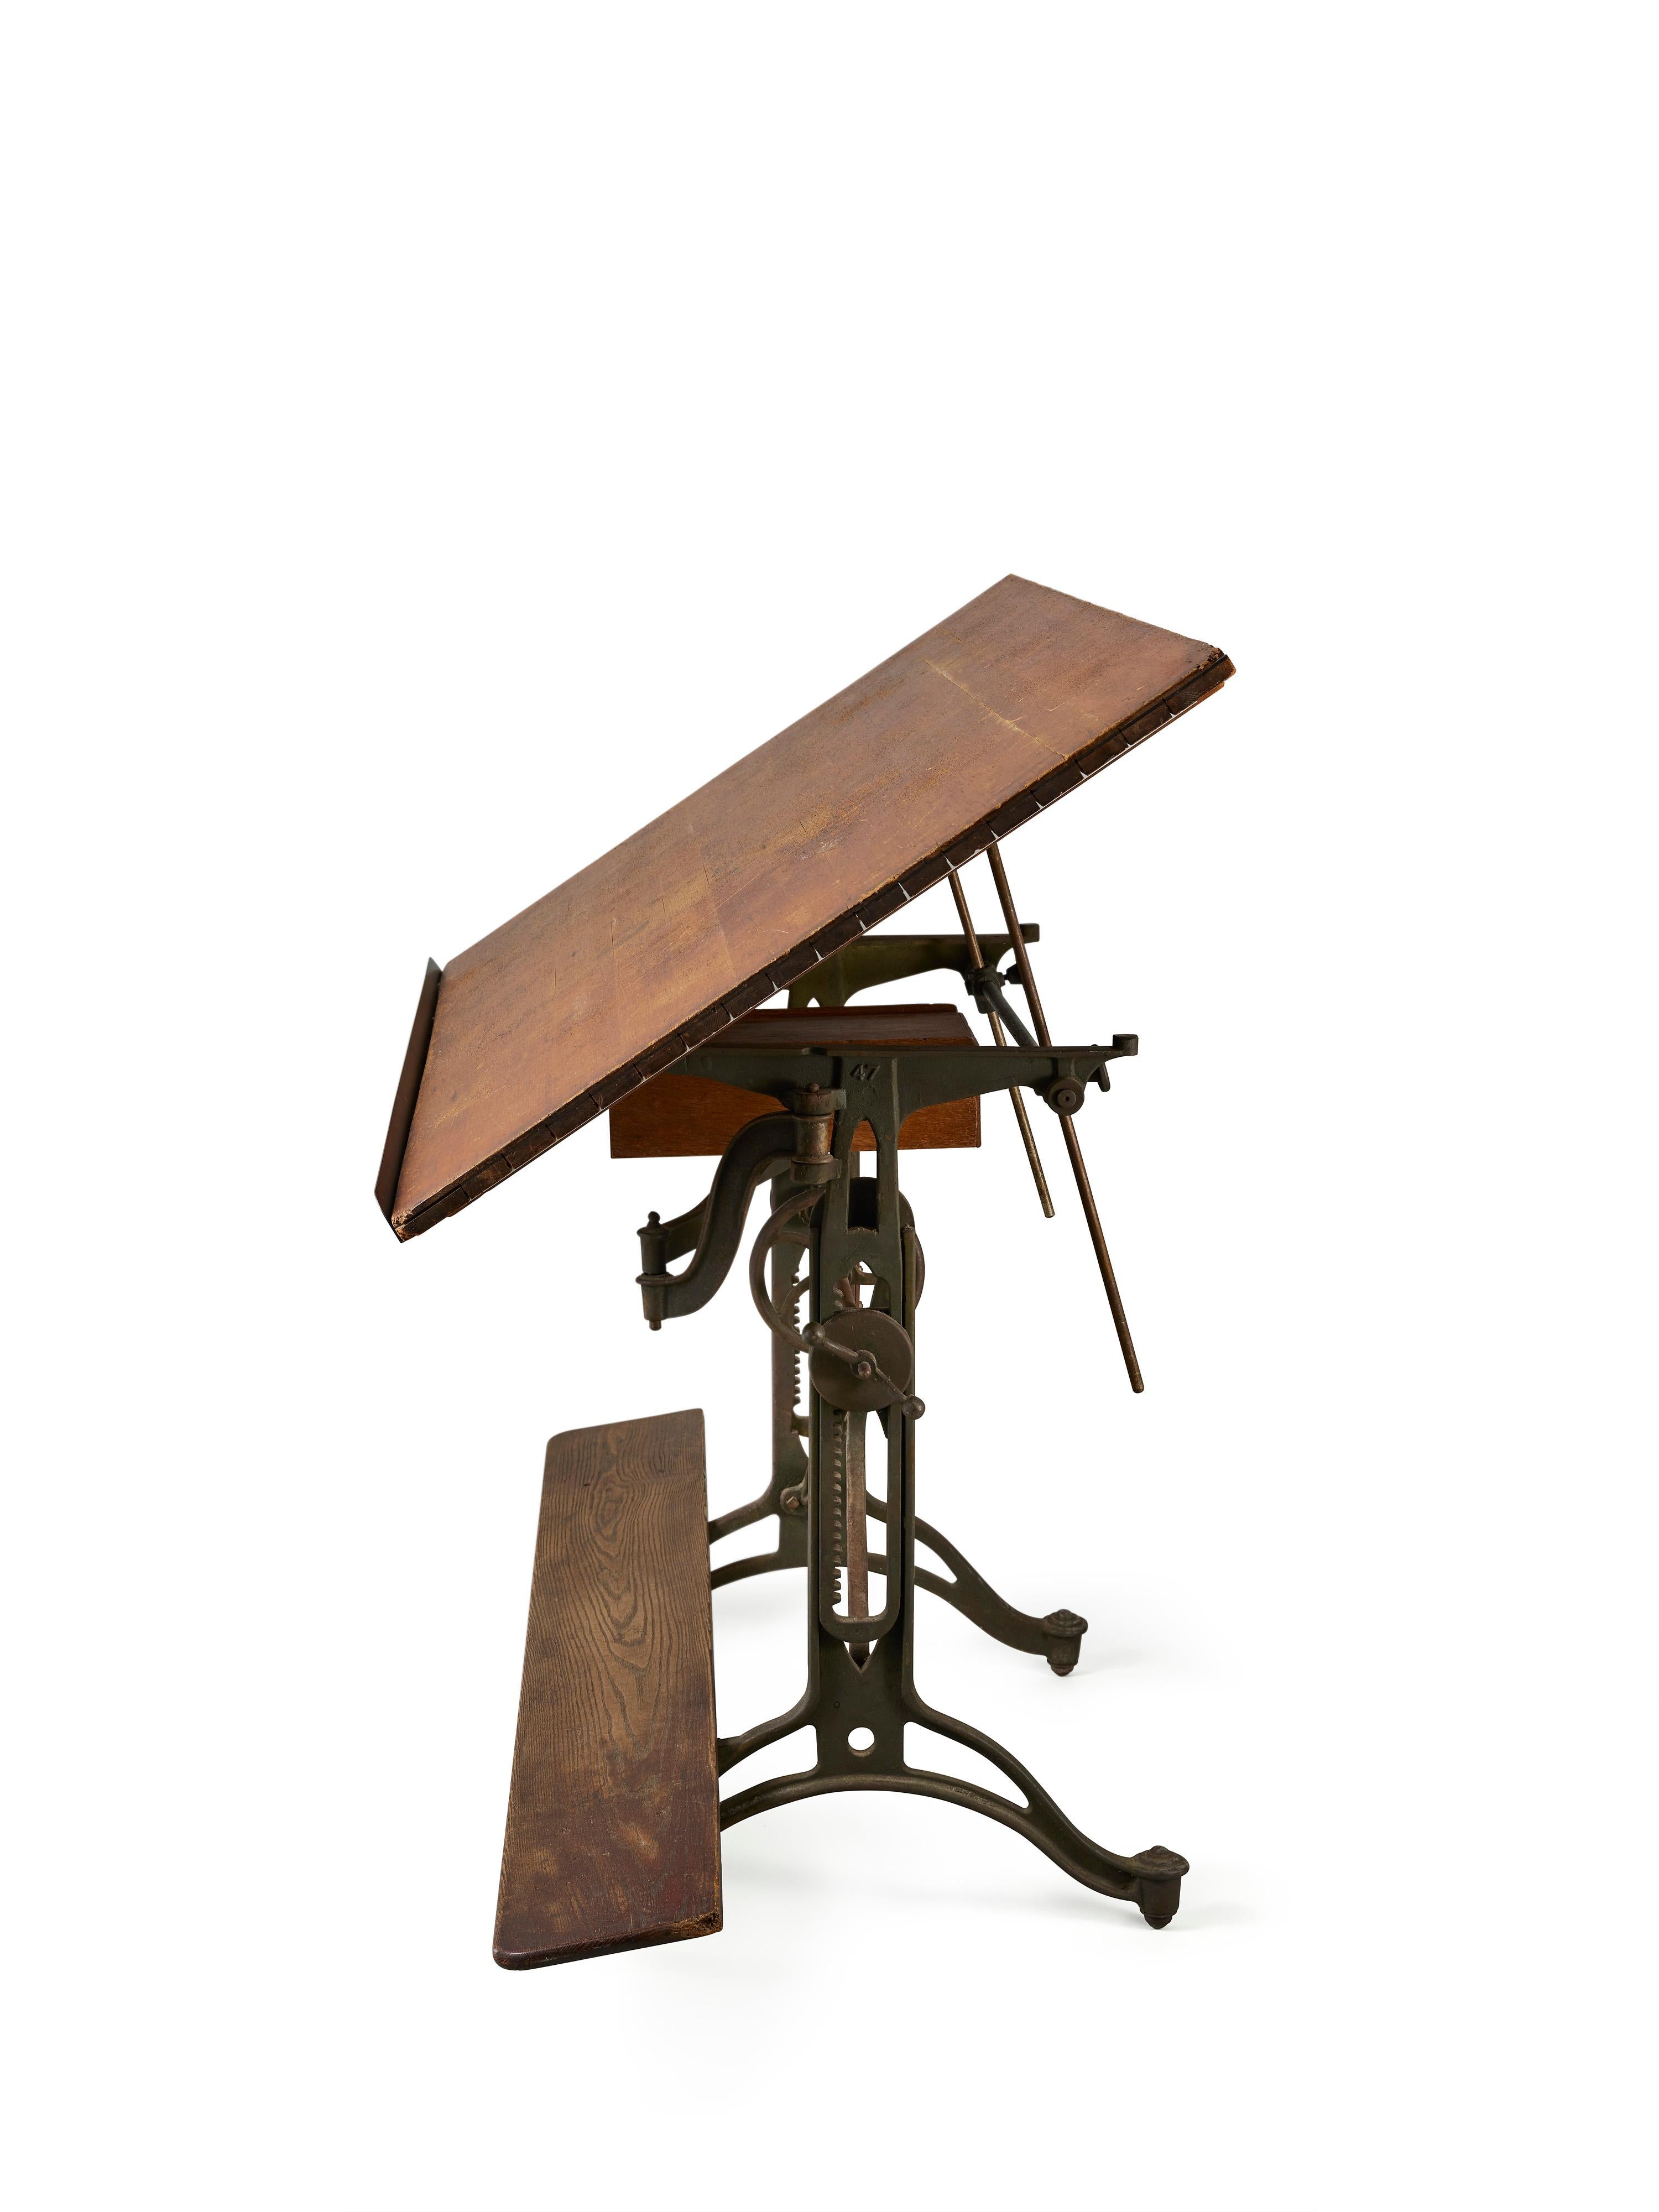 This impressive drafting table boasts a signature X- shape iron base, perfect for use as a standing desk or traditional dining table. Its original oak top, refinished with breadboard ends, adds to its charm. The mechanics operate smoothly, allowing